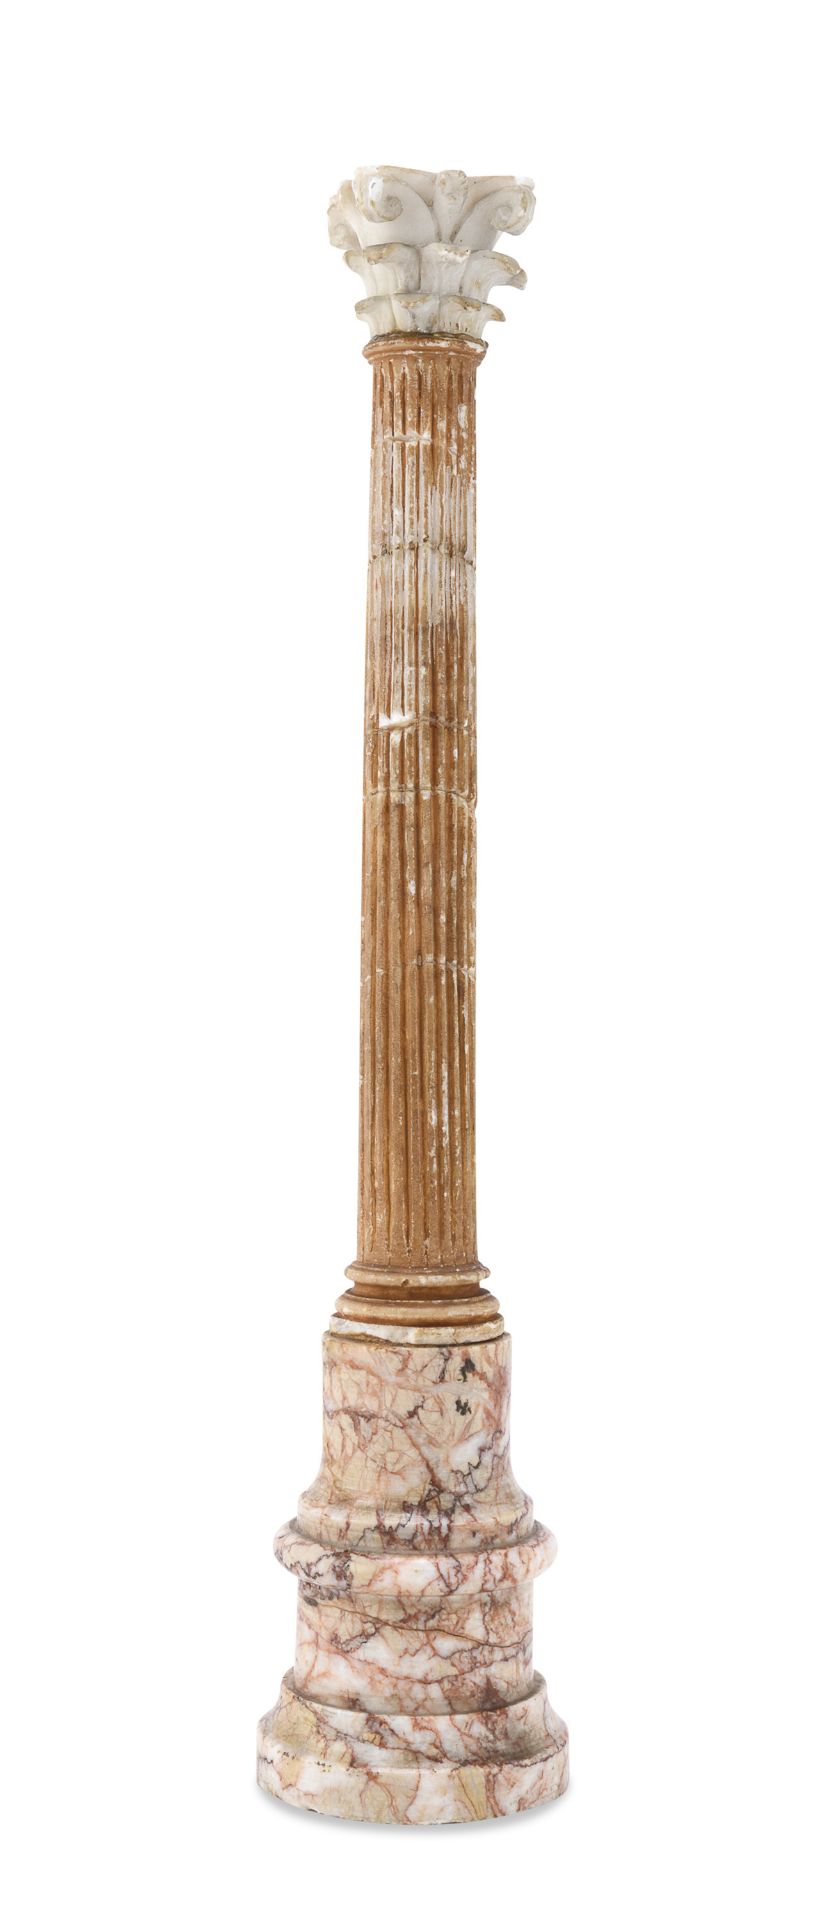 MODEL OF A COLUMN IN MARBLE 19TH CENTURY